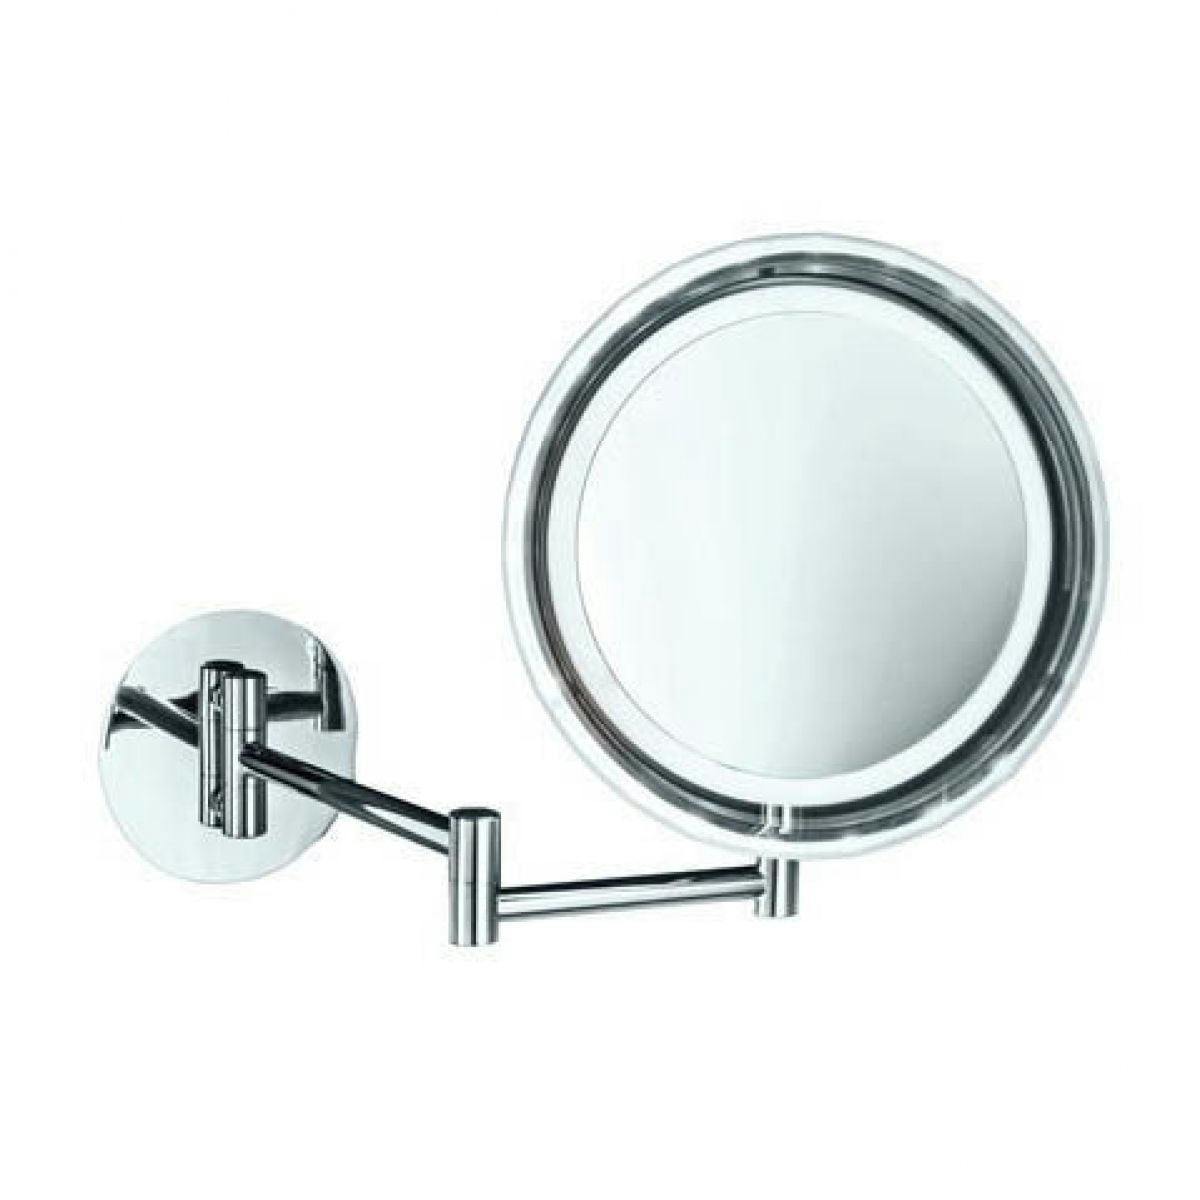 Luxe 5x Magnification LED Wall Mounted Mirror in Polished Chrome